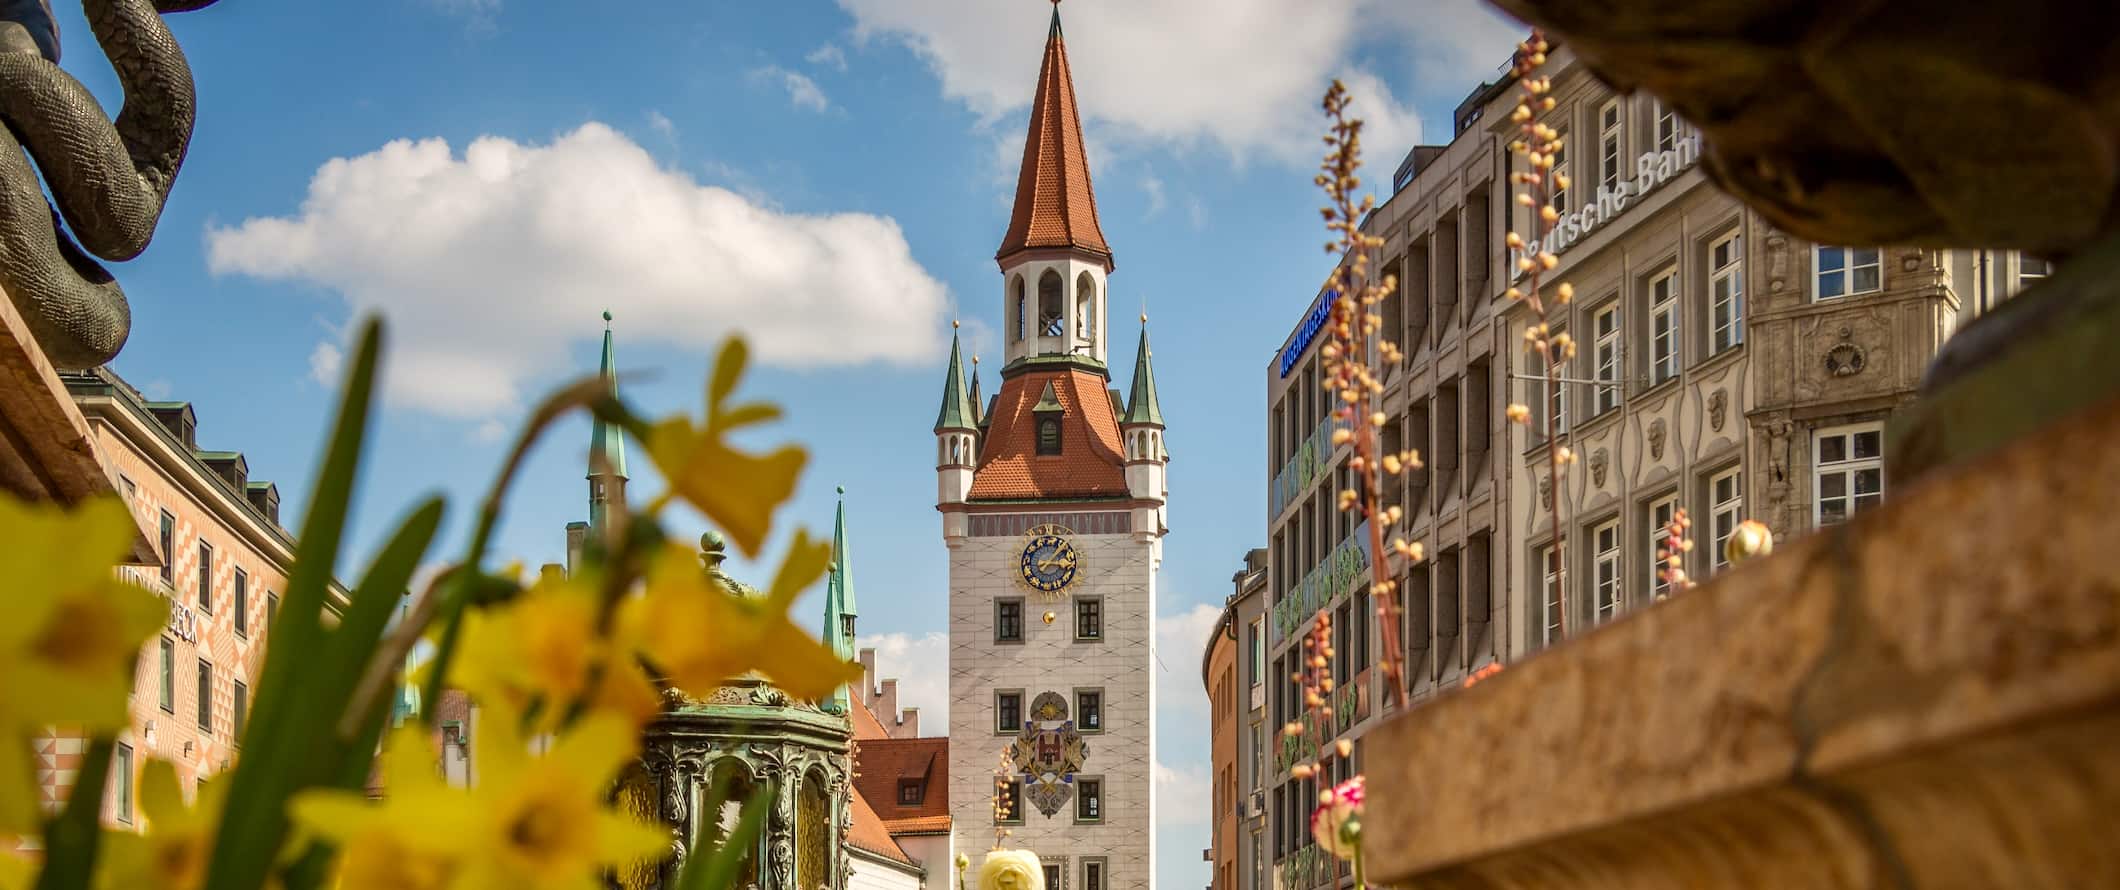 The historic old town of Munich, Germany during the spring with flower blooming near a church